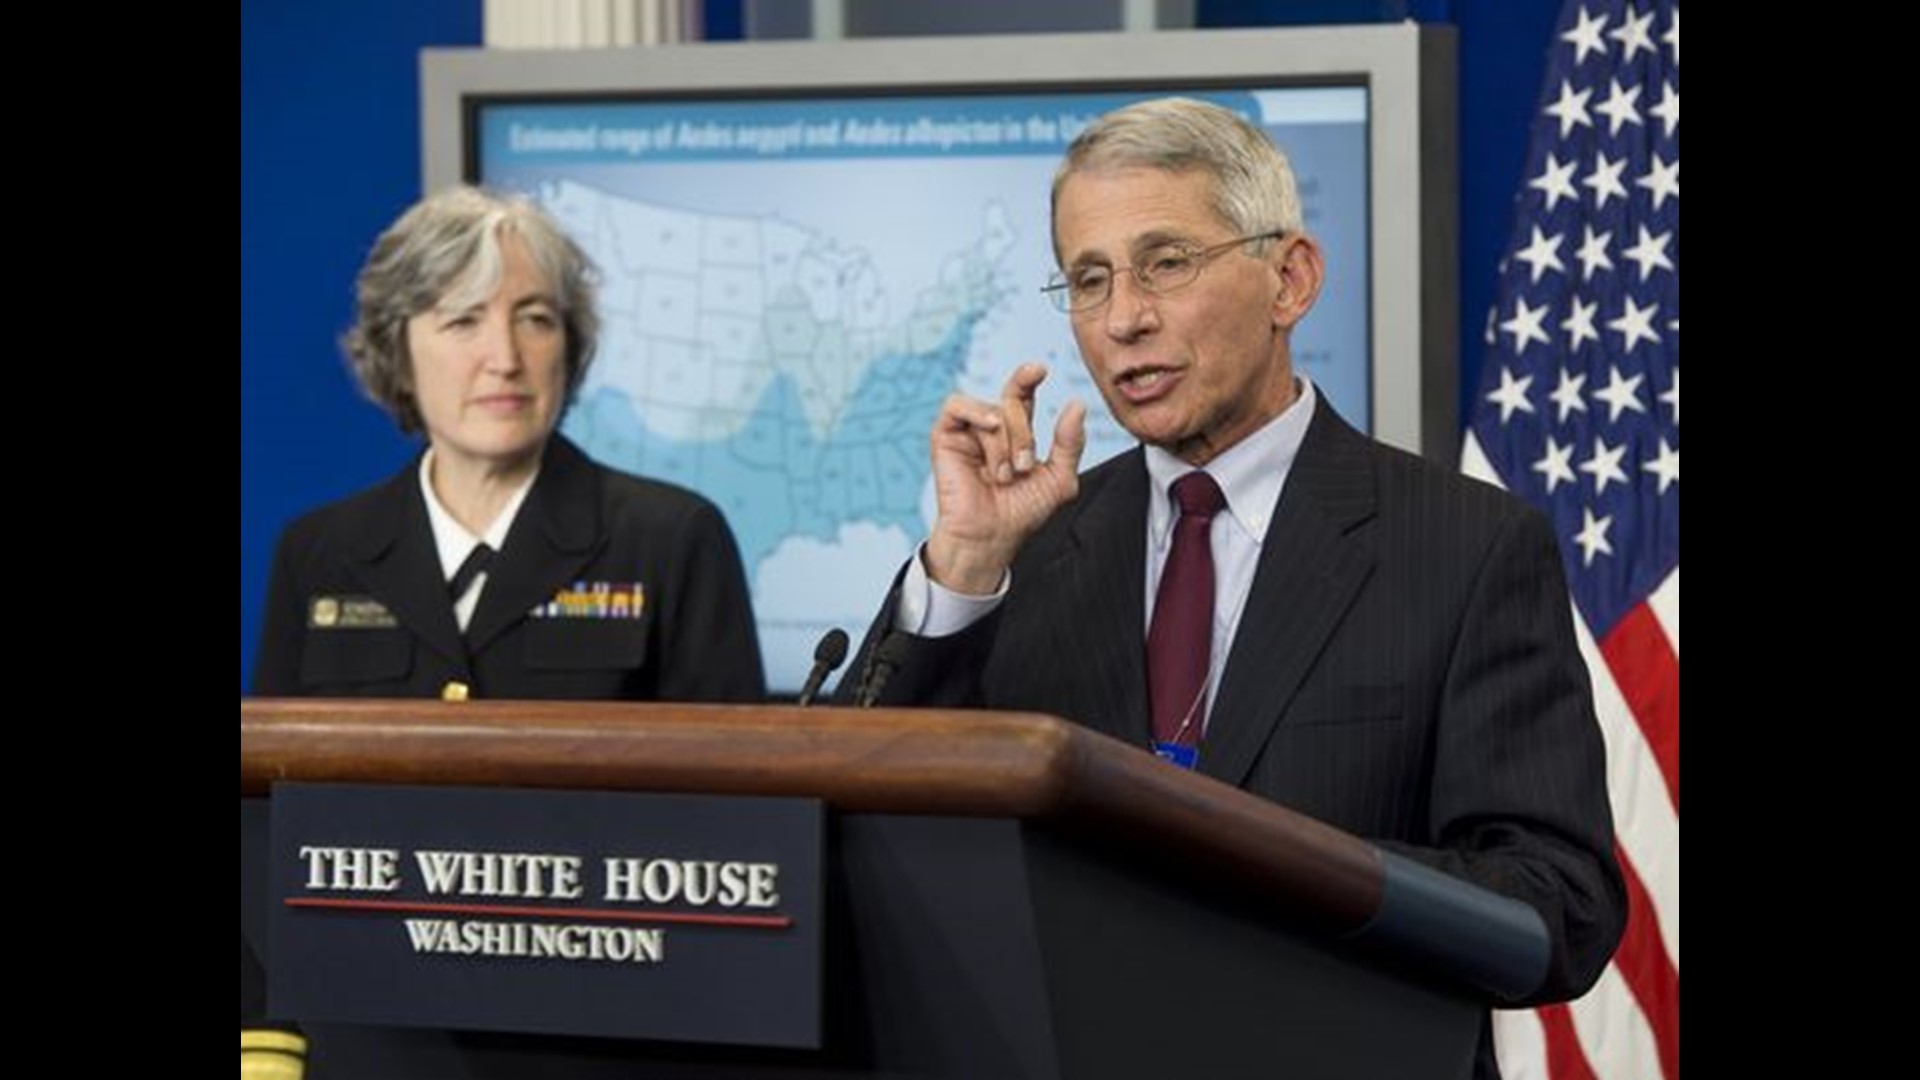 Dr. Anthony Fauci said when he becomes a chief medical adviser to President Joe Biden, he would push to vaccinate teachers as a priority.